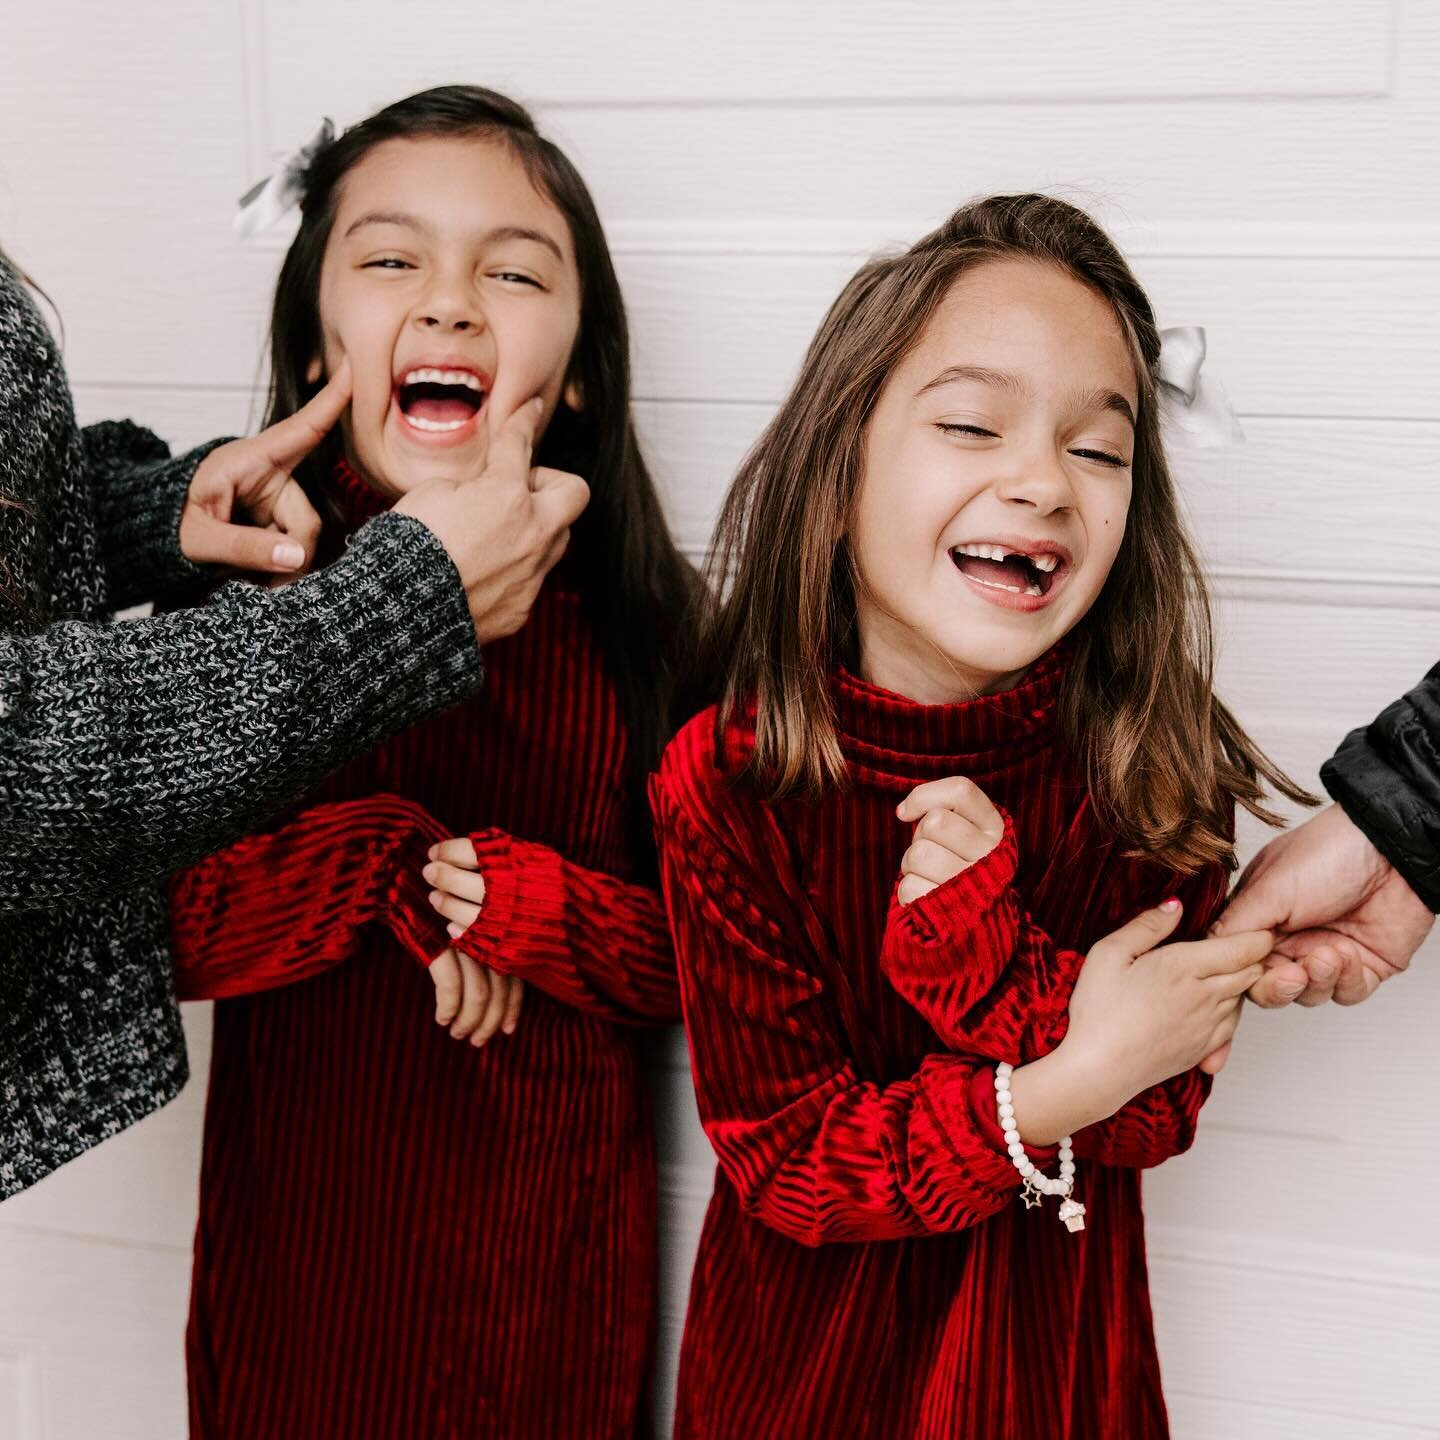 My baby cousins with all the pre Santa photo vibes! Their little selves just SHINE and I&rsquo;m here for every second for it!